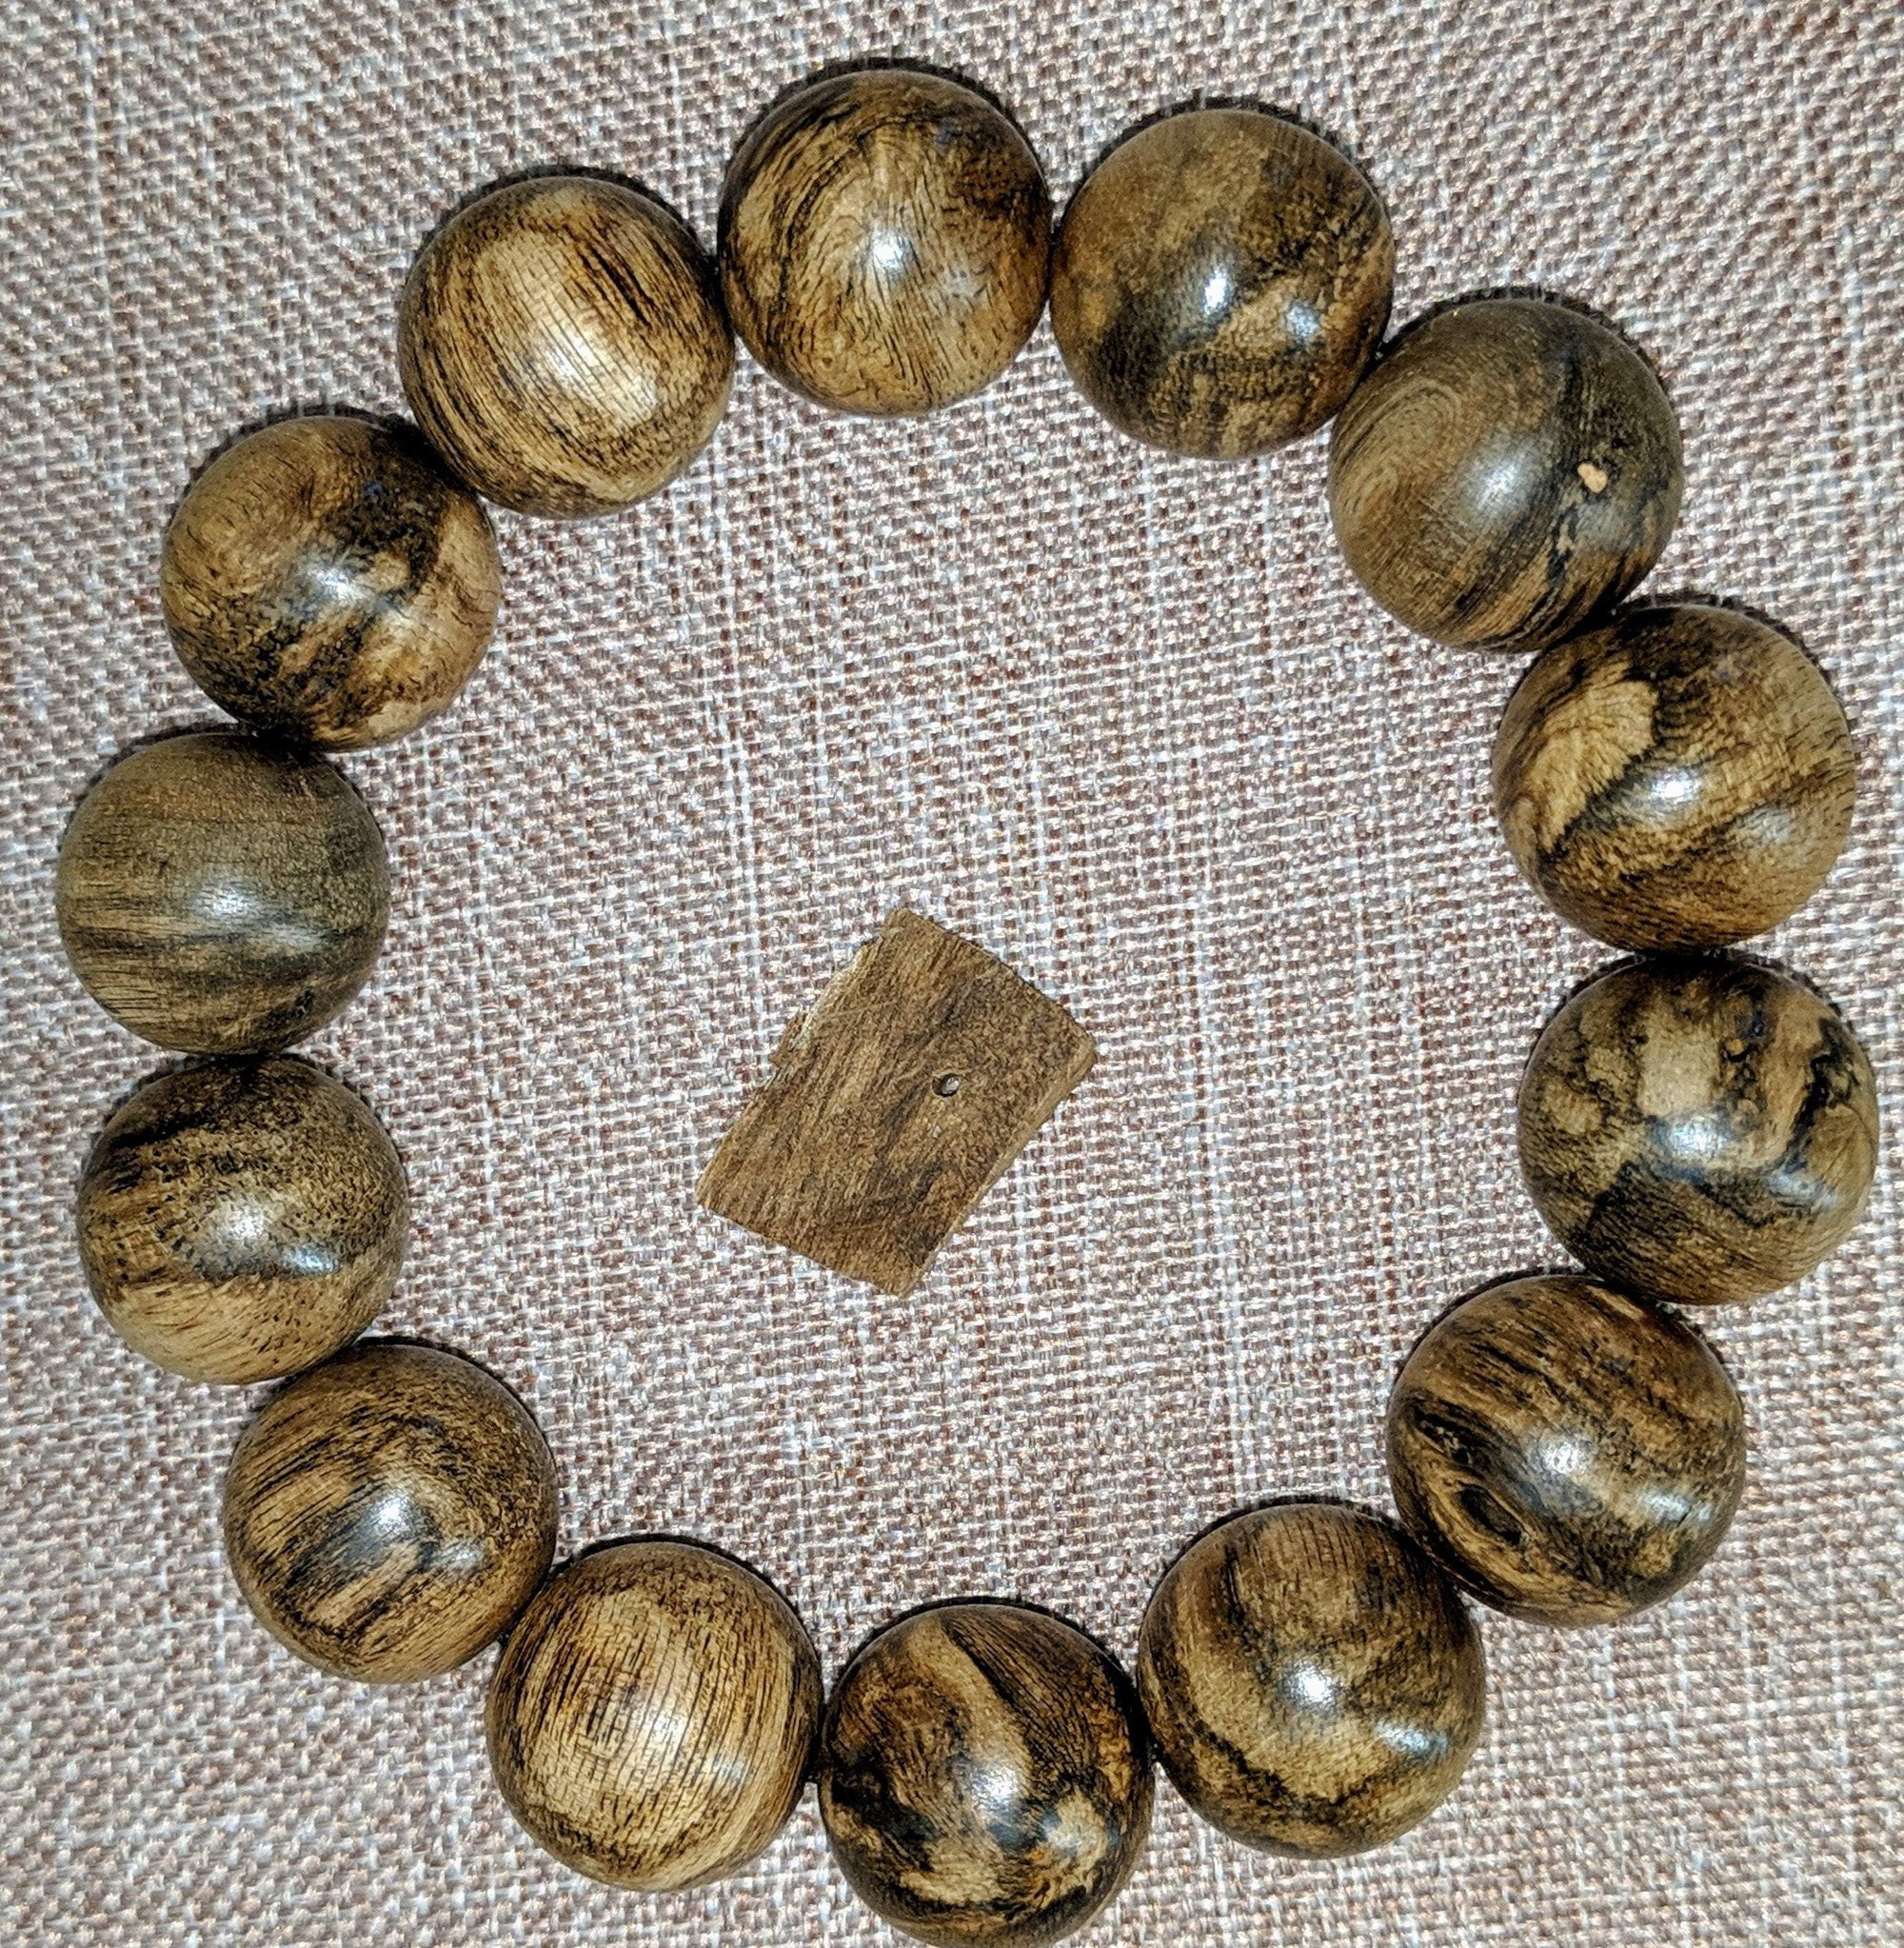 *SOLD* The Marble Trilogy - Wild Borneo Agarwood Bracelet - Number 2, and Number 3 - 24g